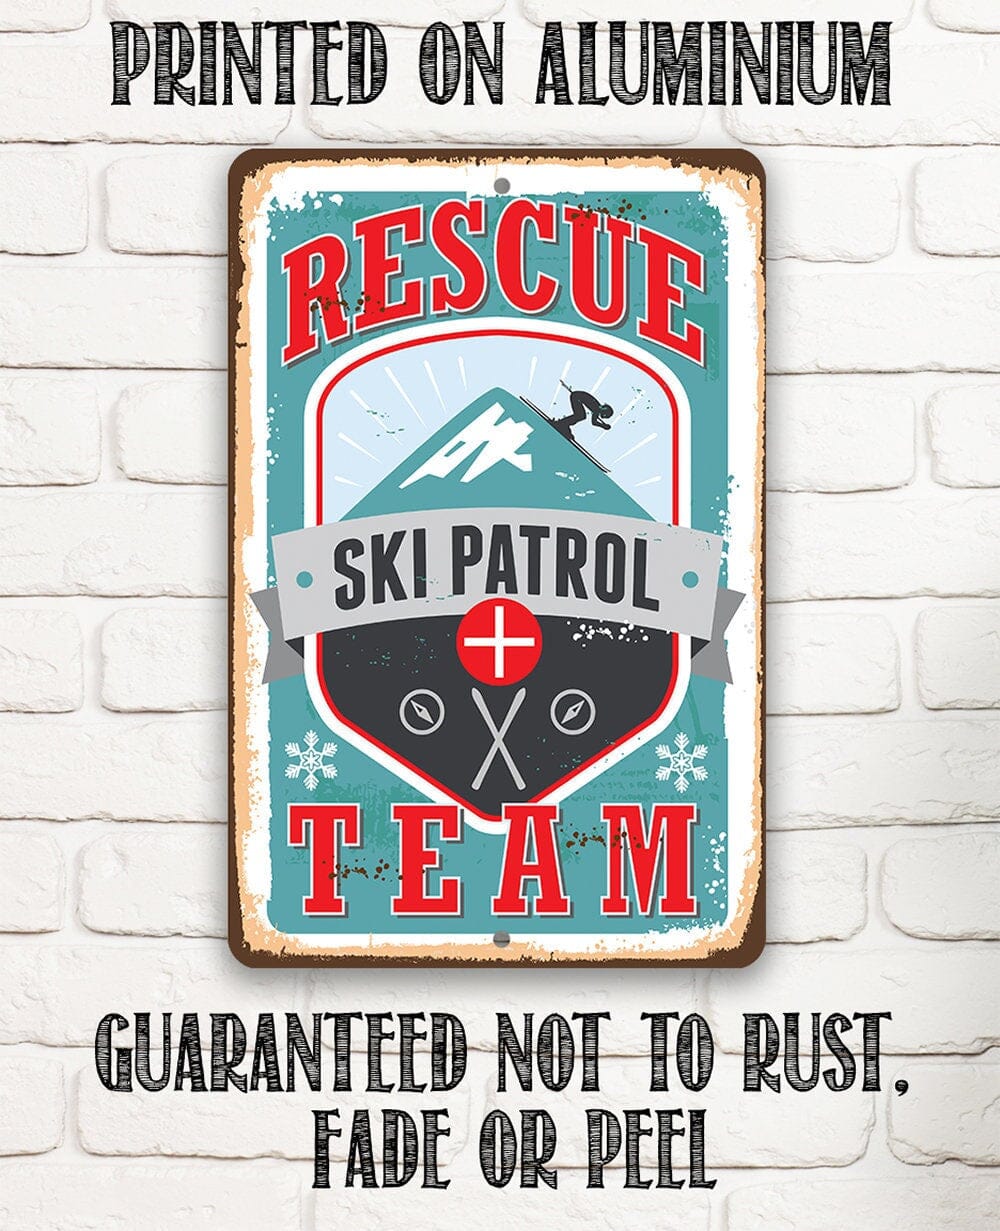 Ski Patrol Rescue Team - Rustic Style Emergency Response Unit Sign 8" x 12" or 12" x 18" Aluminum Tin Awesome Metal Poster Lone Star Art 